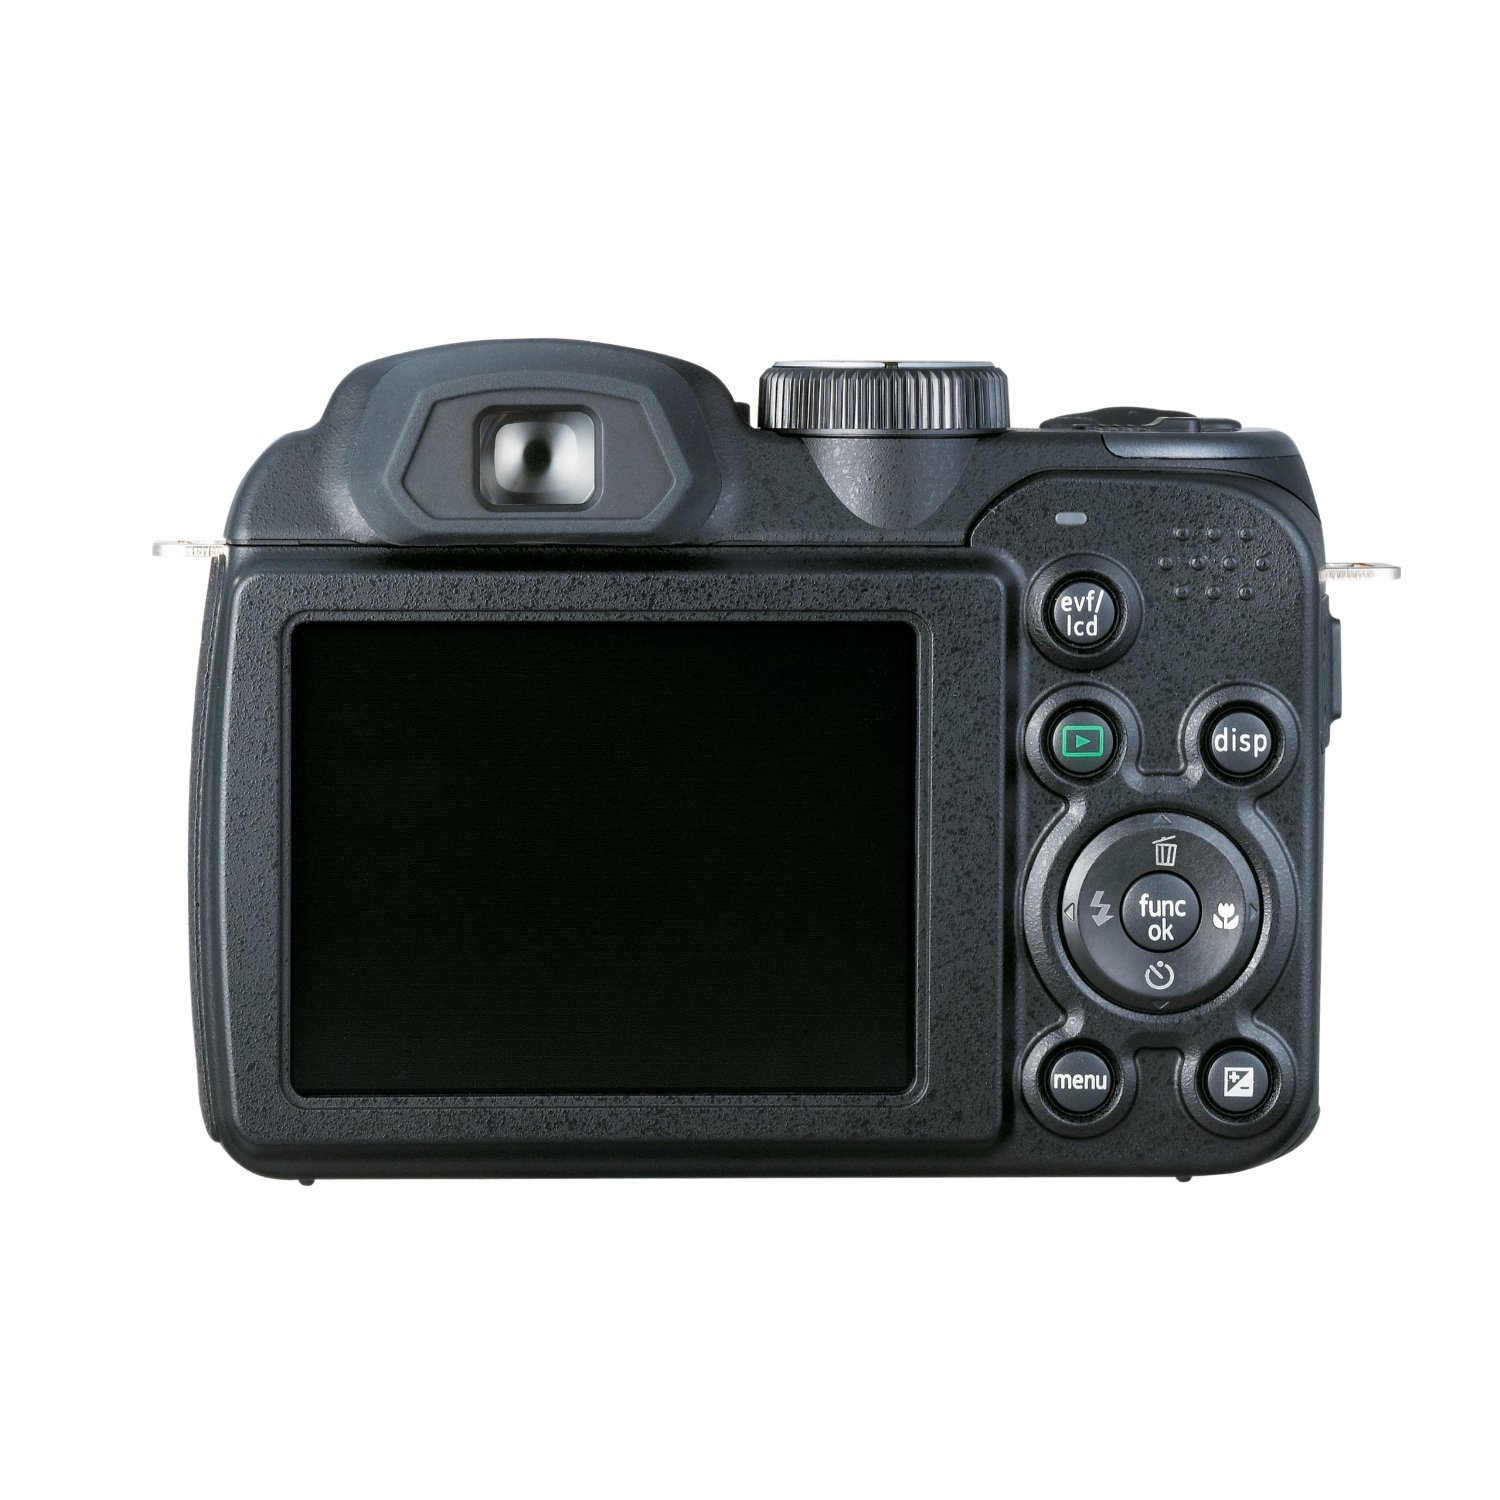 http://thetechjournal.com/wp-content/uploads/images/1203/1332339890-ge-power-pro-x500bk-16-mp-with-15-x-optical-zoom-digital-camera-8.jpg